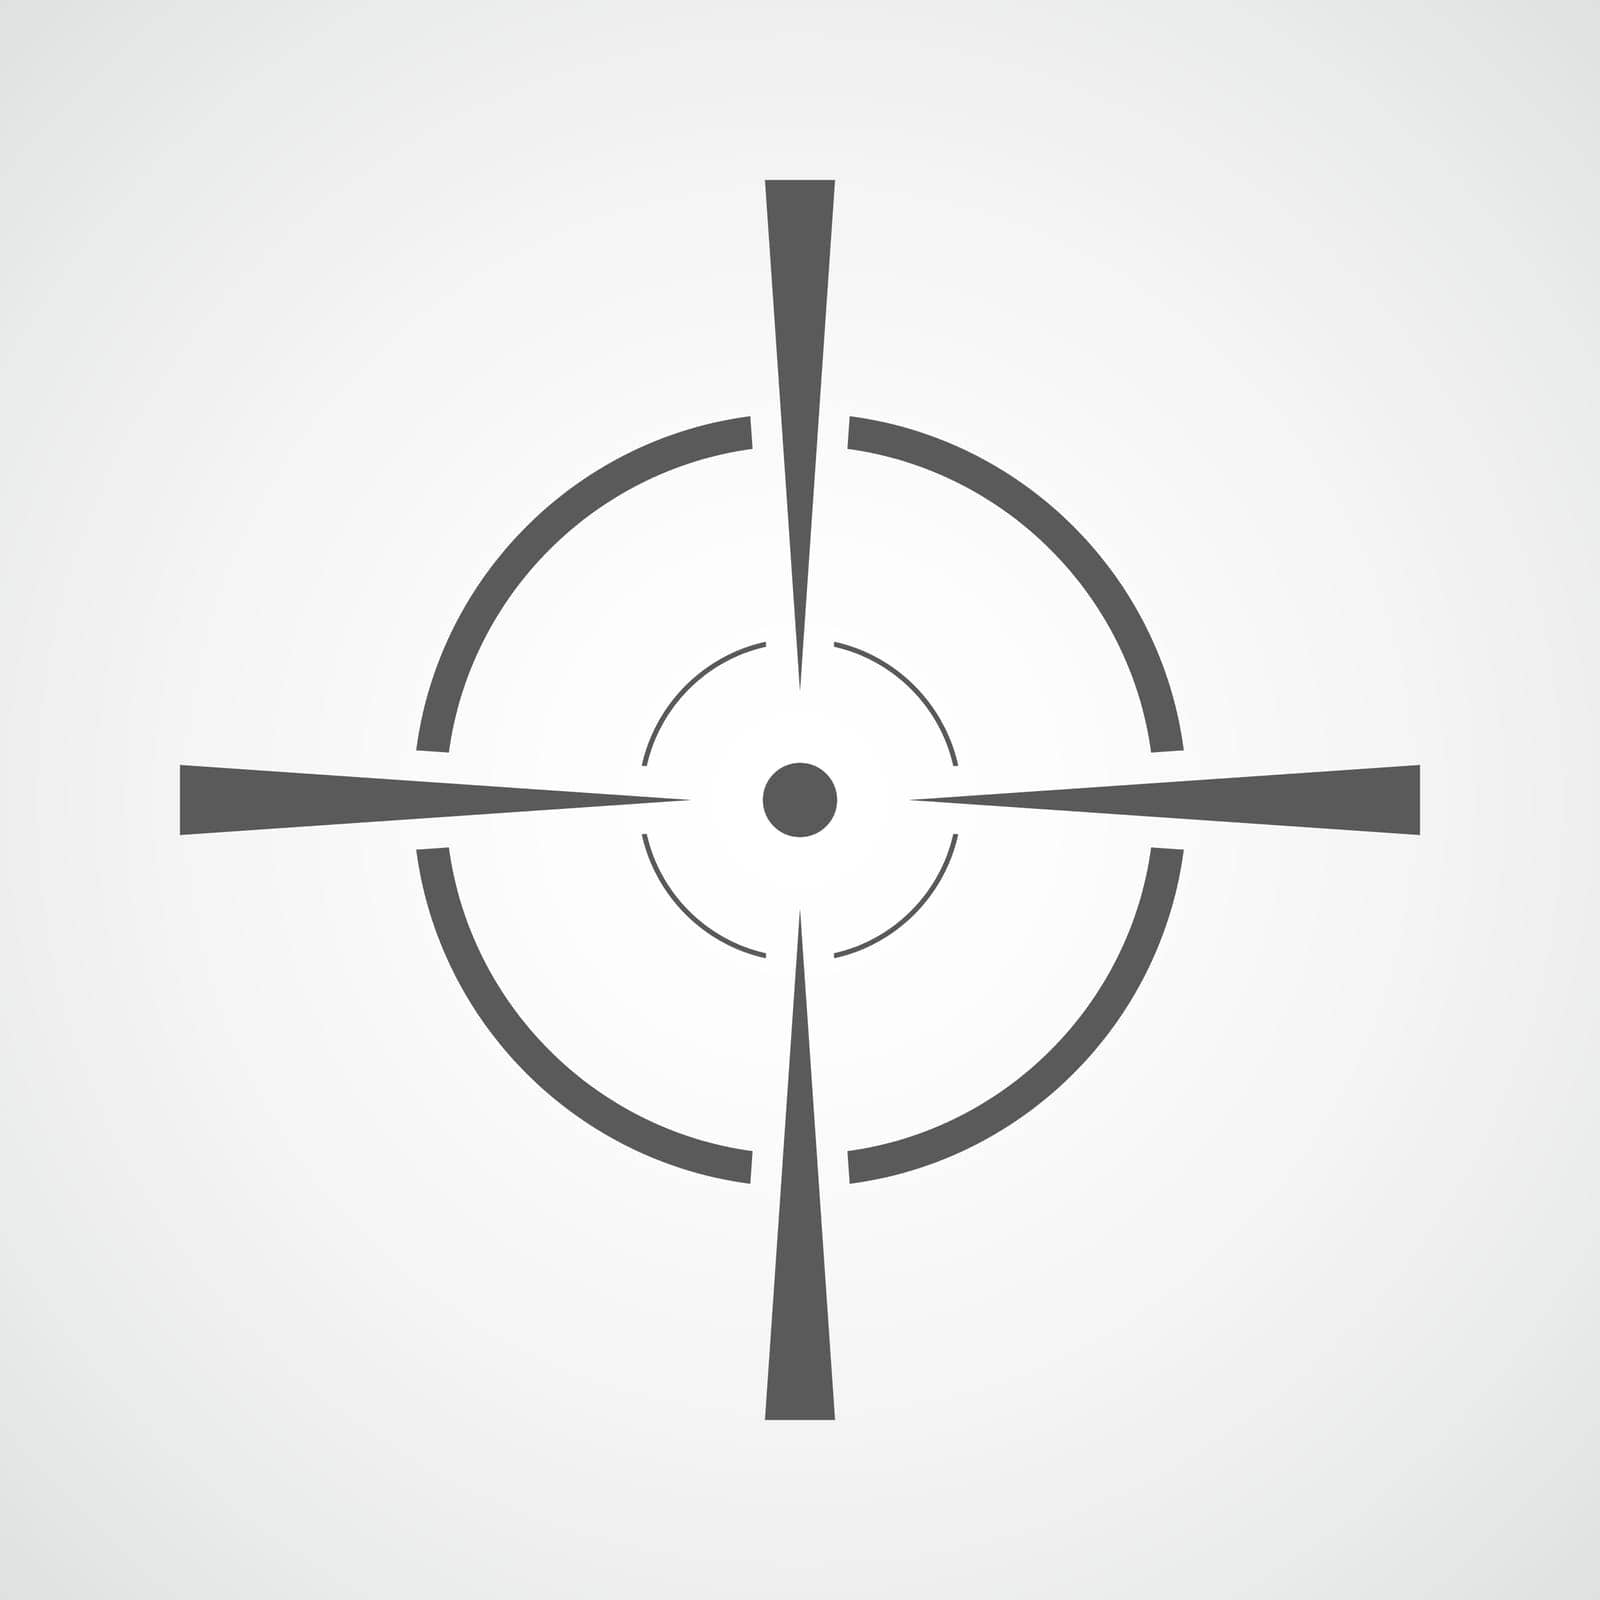 Aim icon in flat design. Vector illustration. Gray aim sign on light background